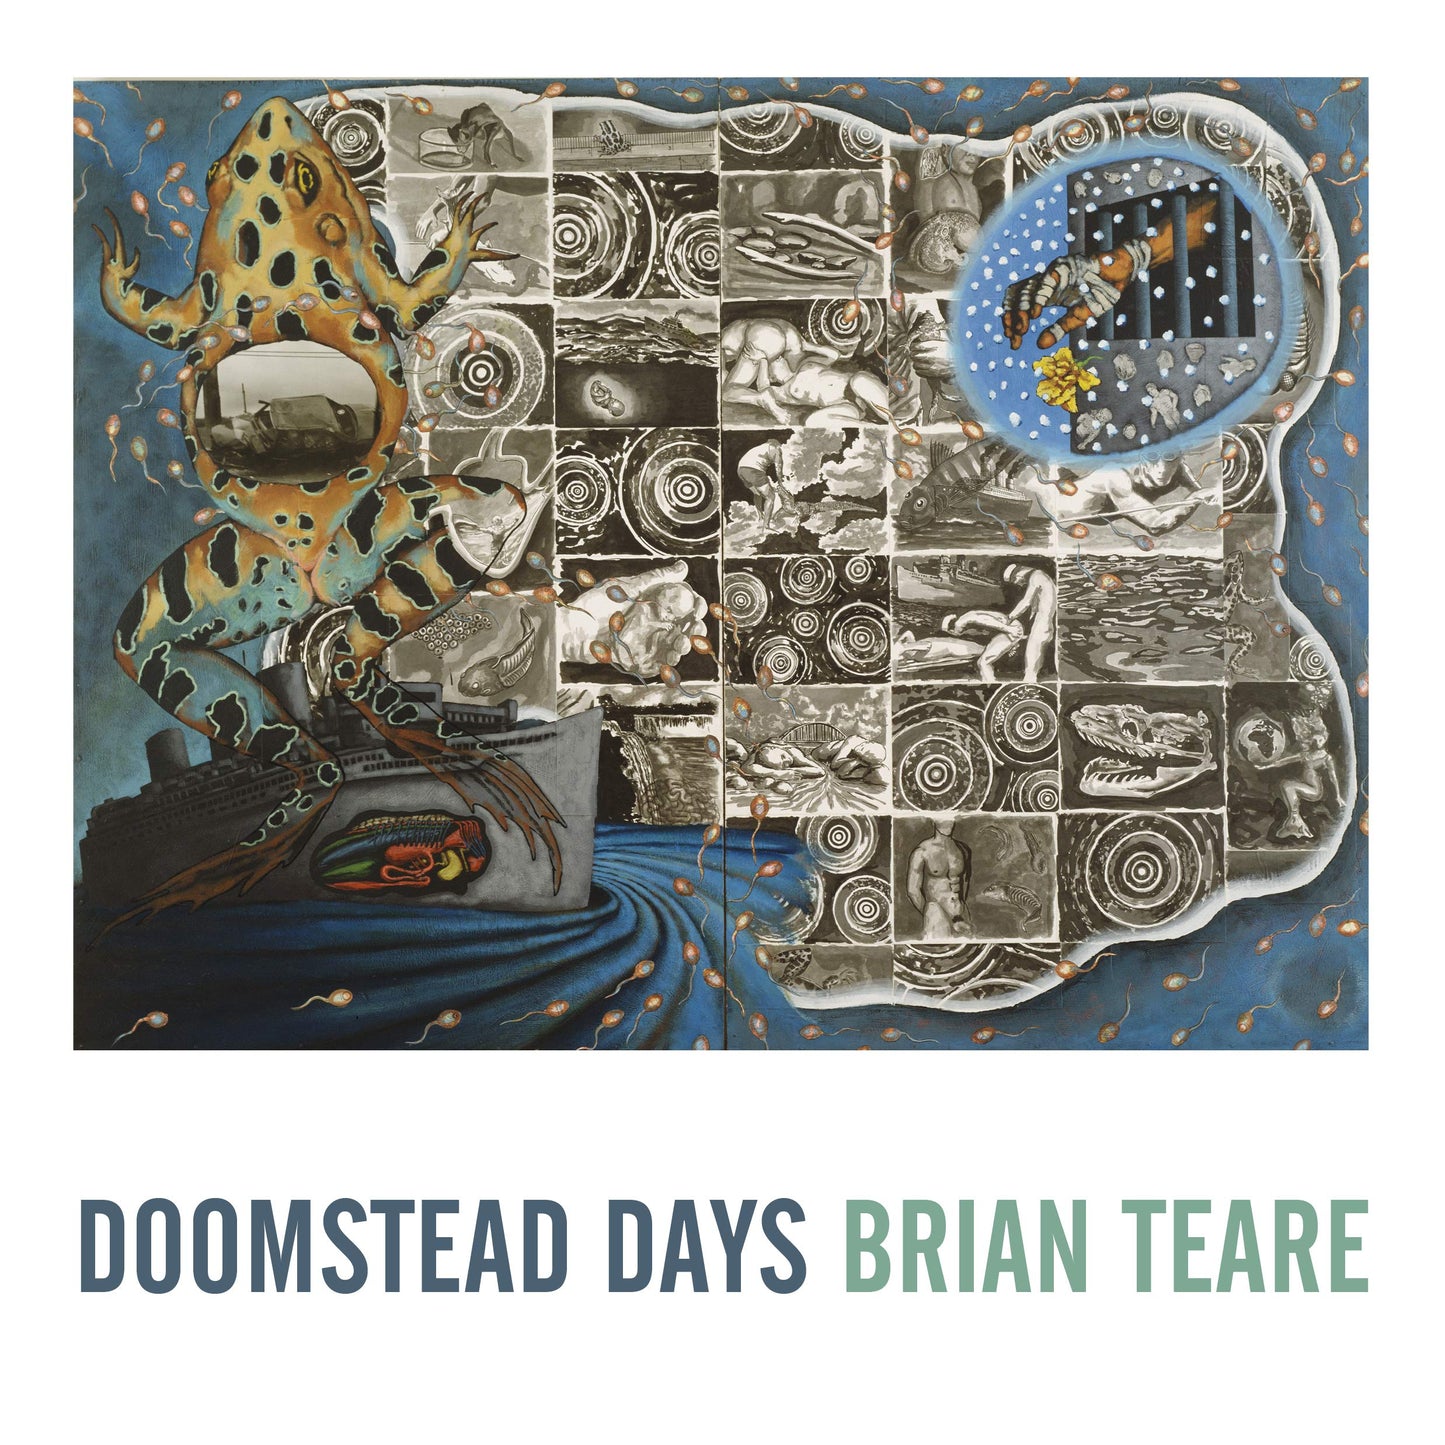 Doomstead Days, by Brian Teare